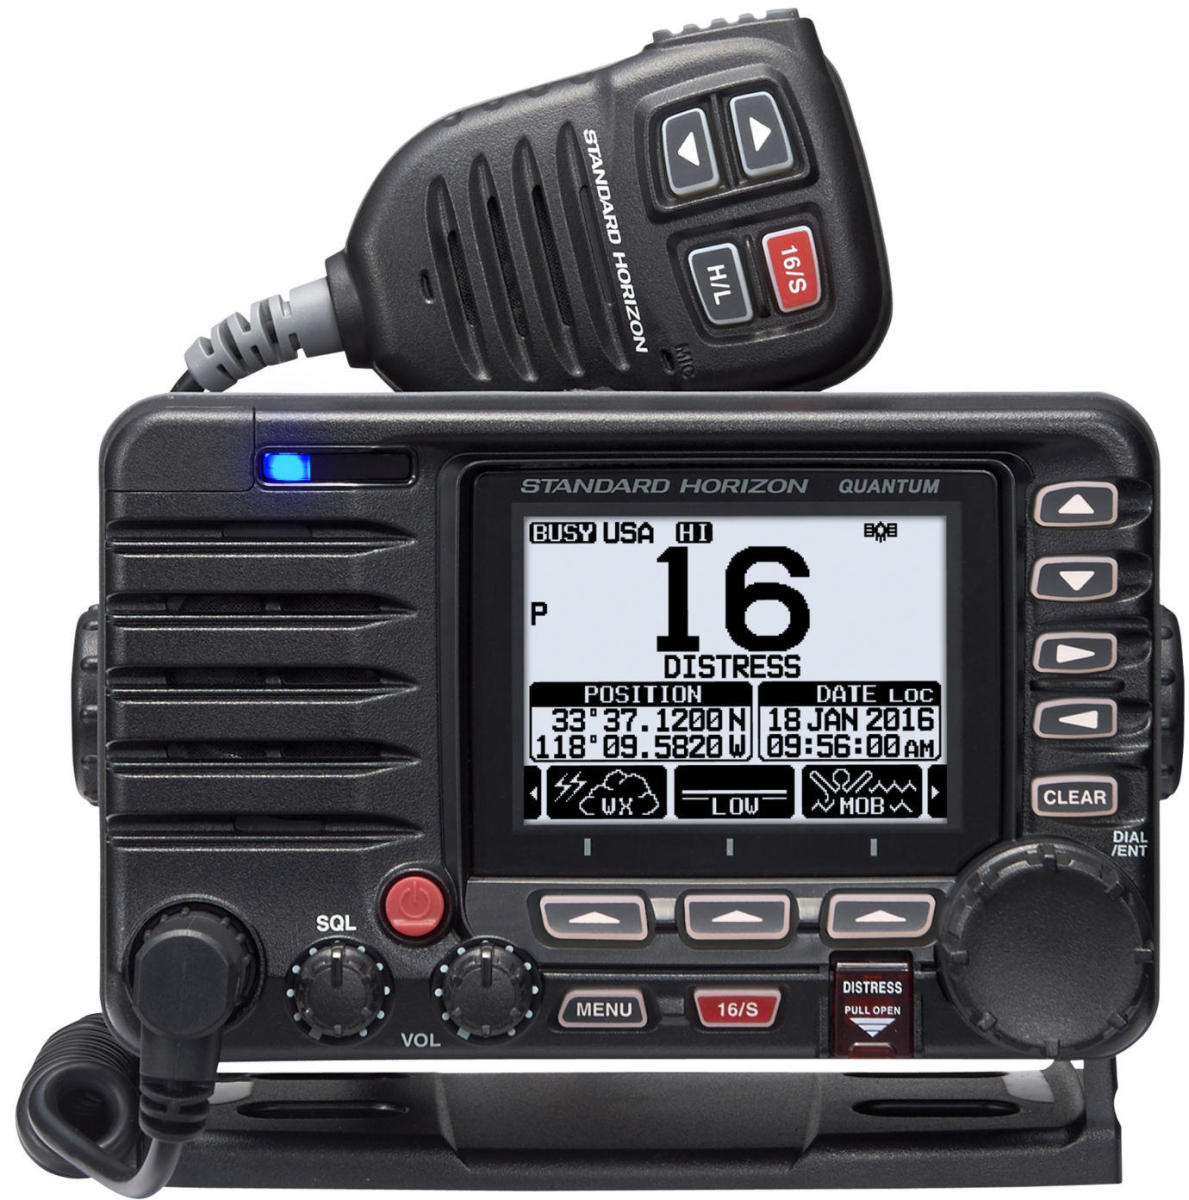 Standard Horizon GX6500: a loaded VHF radio also integrated with Class